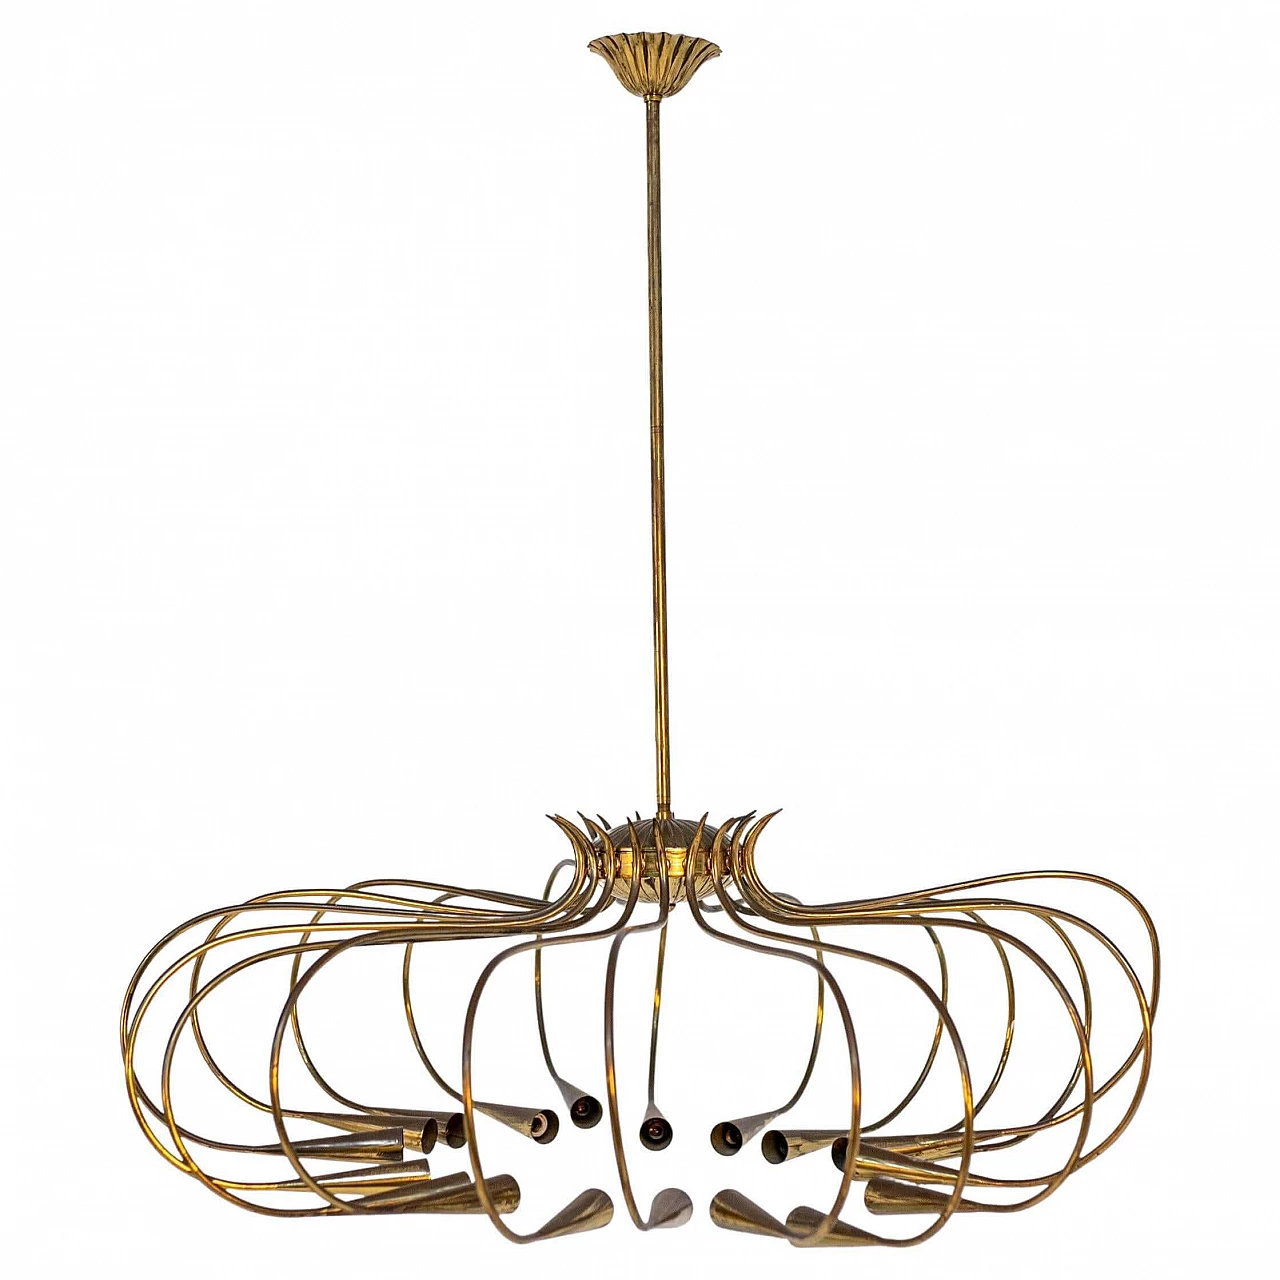 Brass ceiling chandelier by Torlasco for Lumi with 17 lights, 1950s 1400453